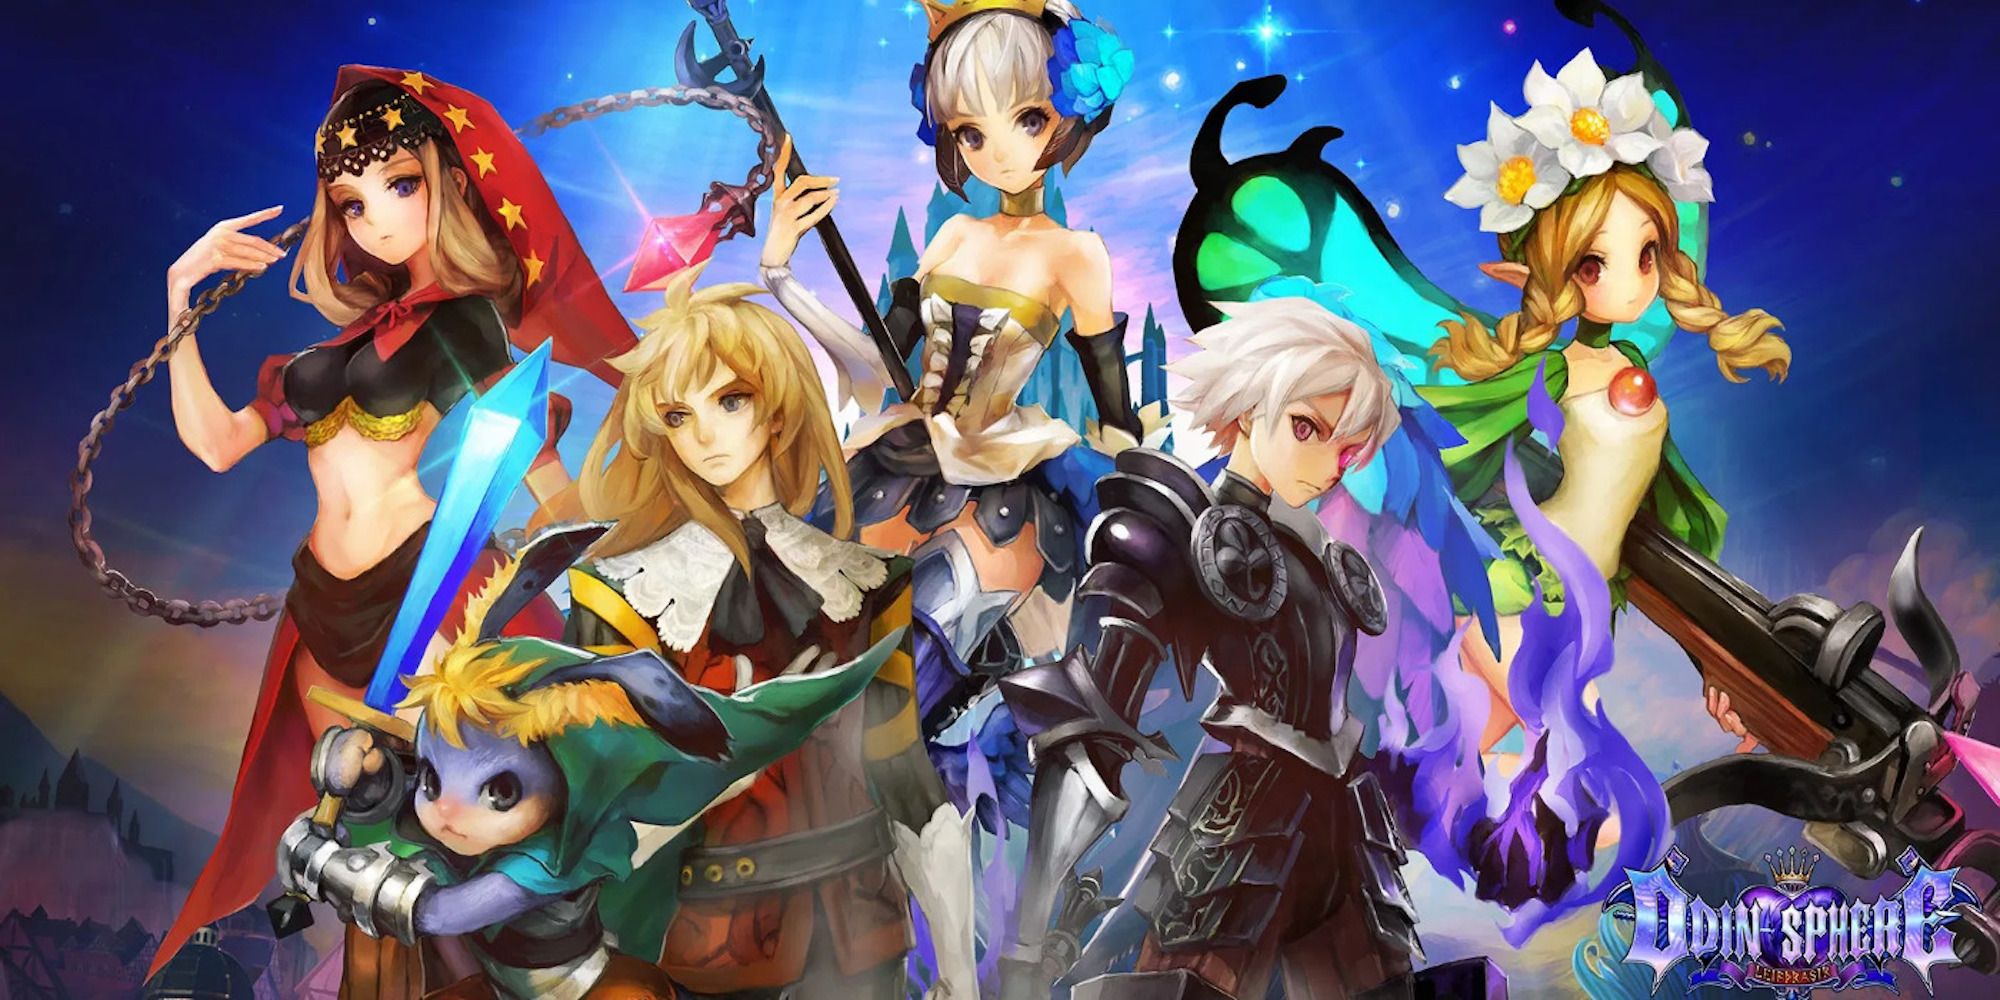 Promo art featuring characters from Odin Sphere: Leifthrasir